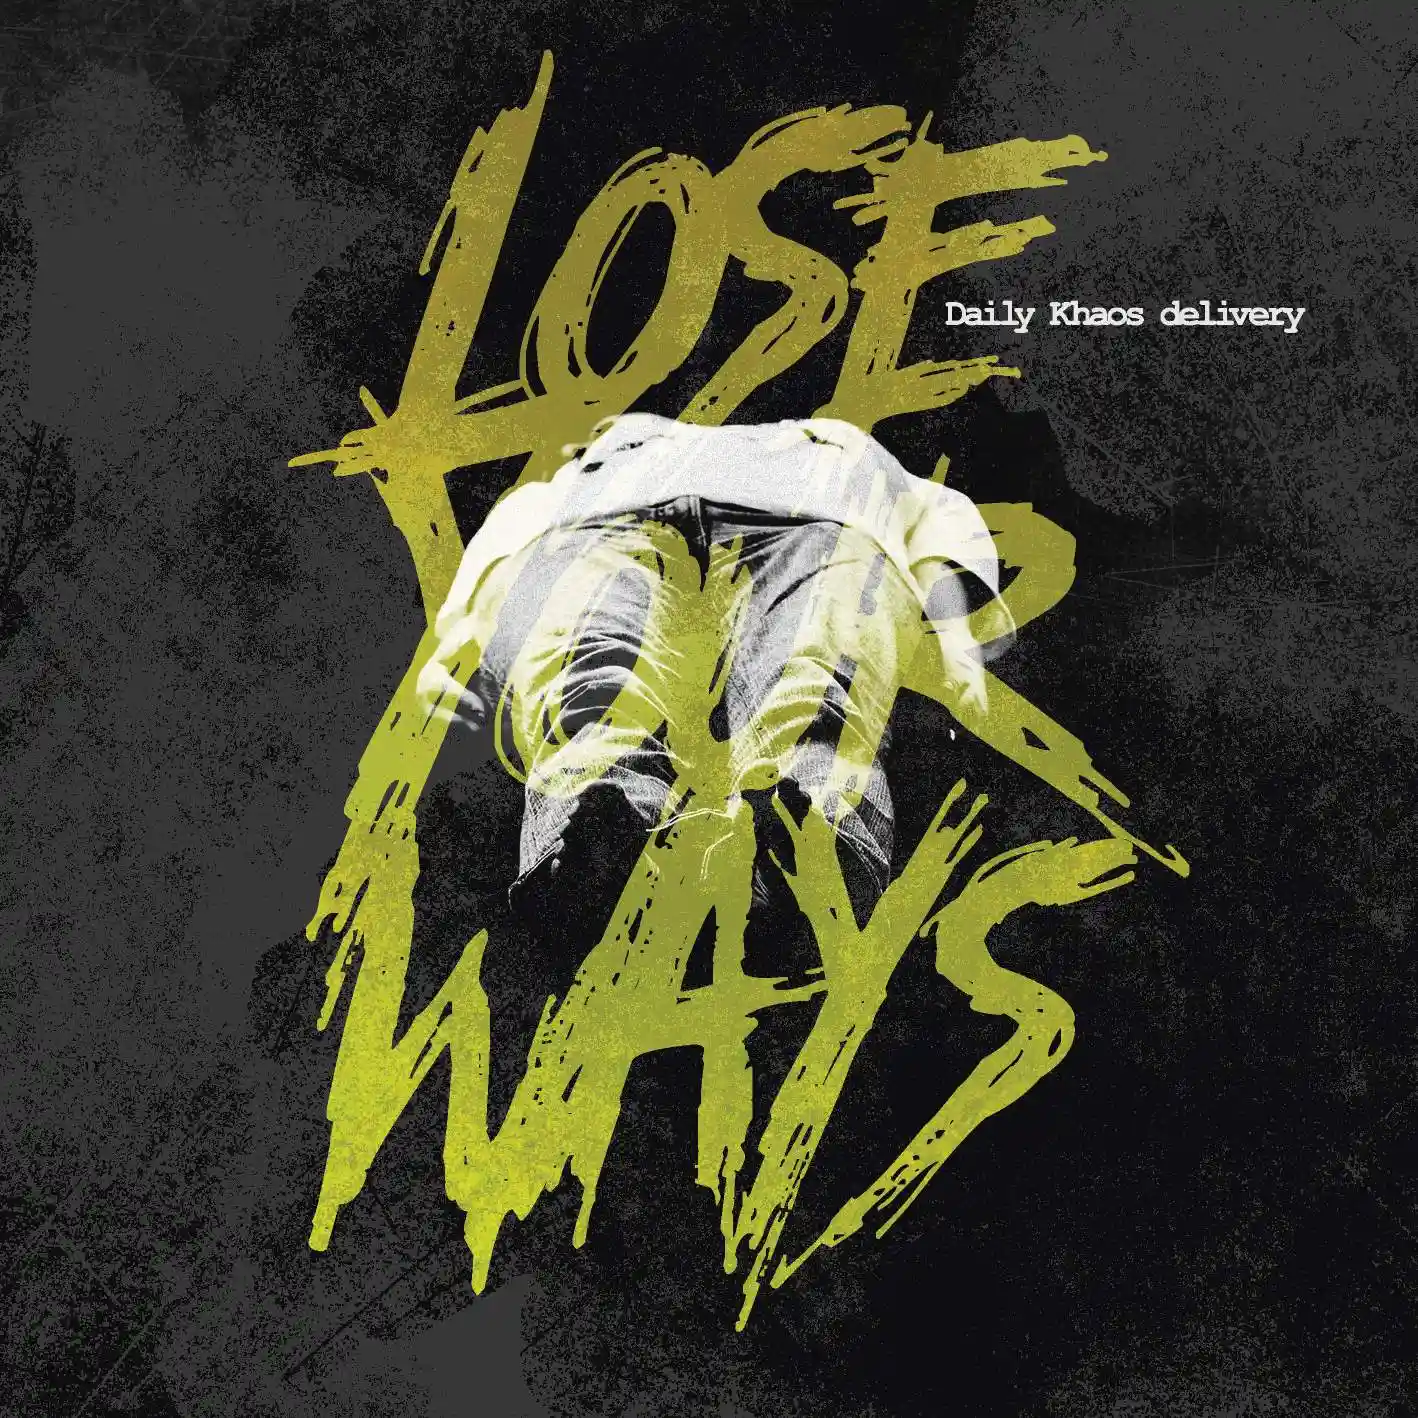 Daily Khaos delivery - Lose Your Ways